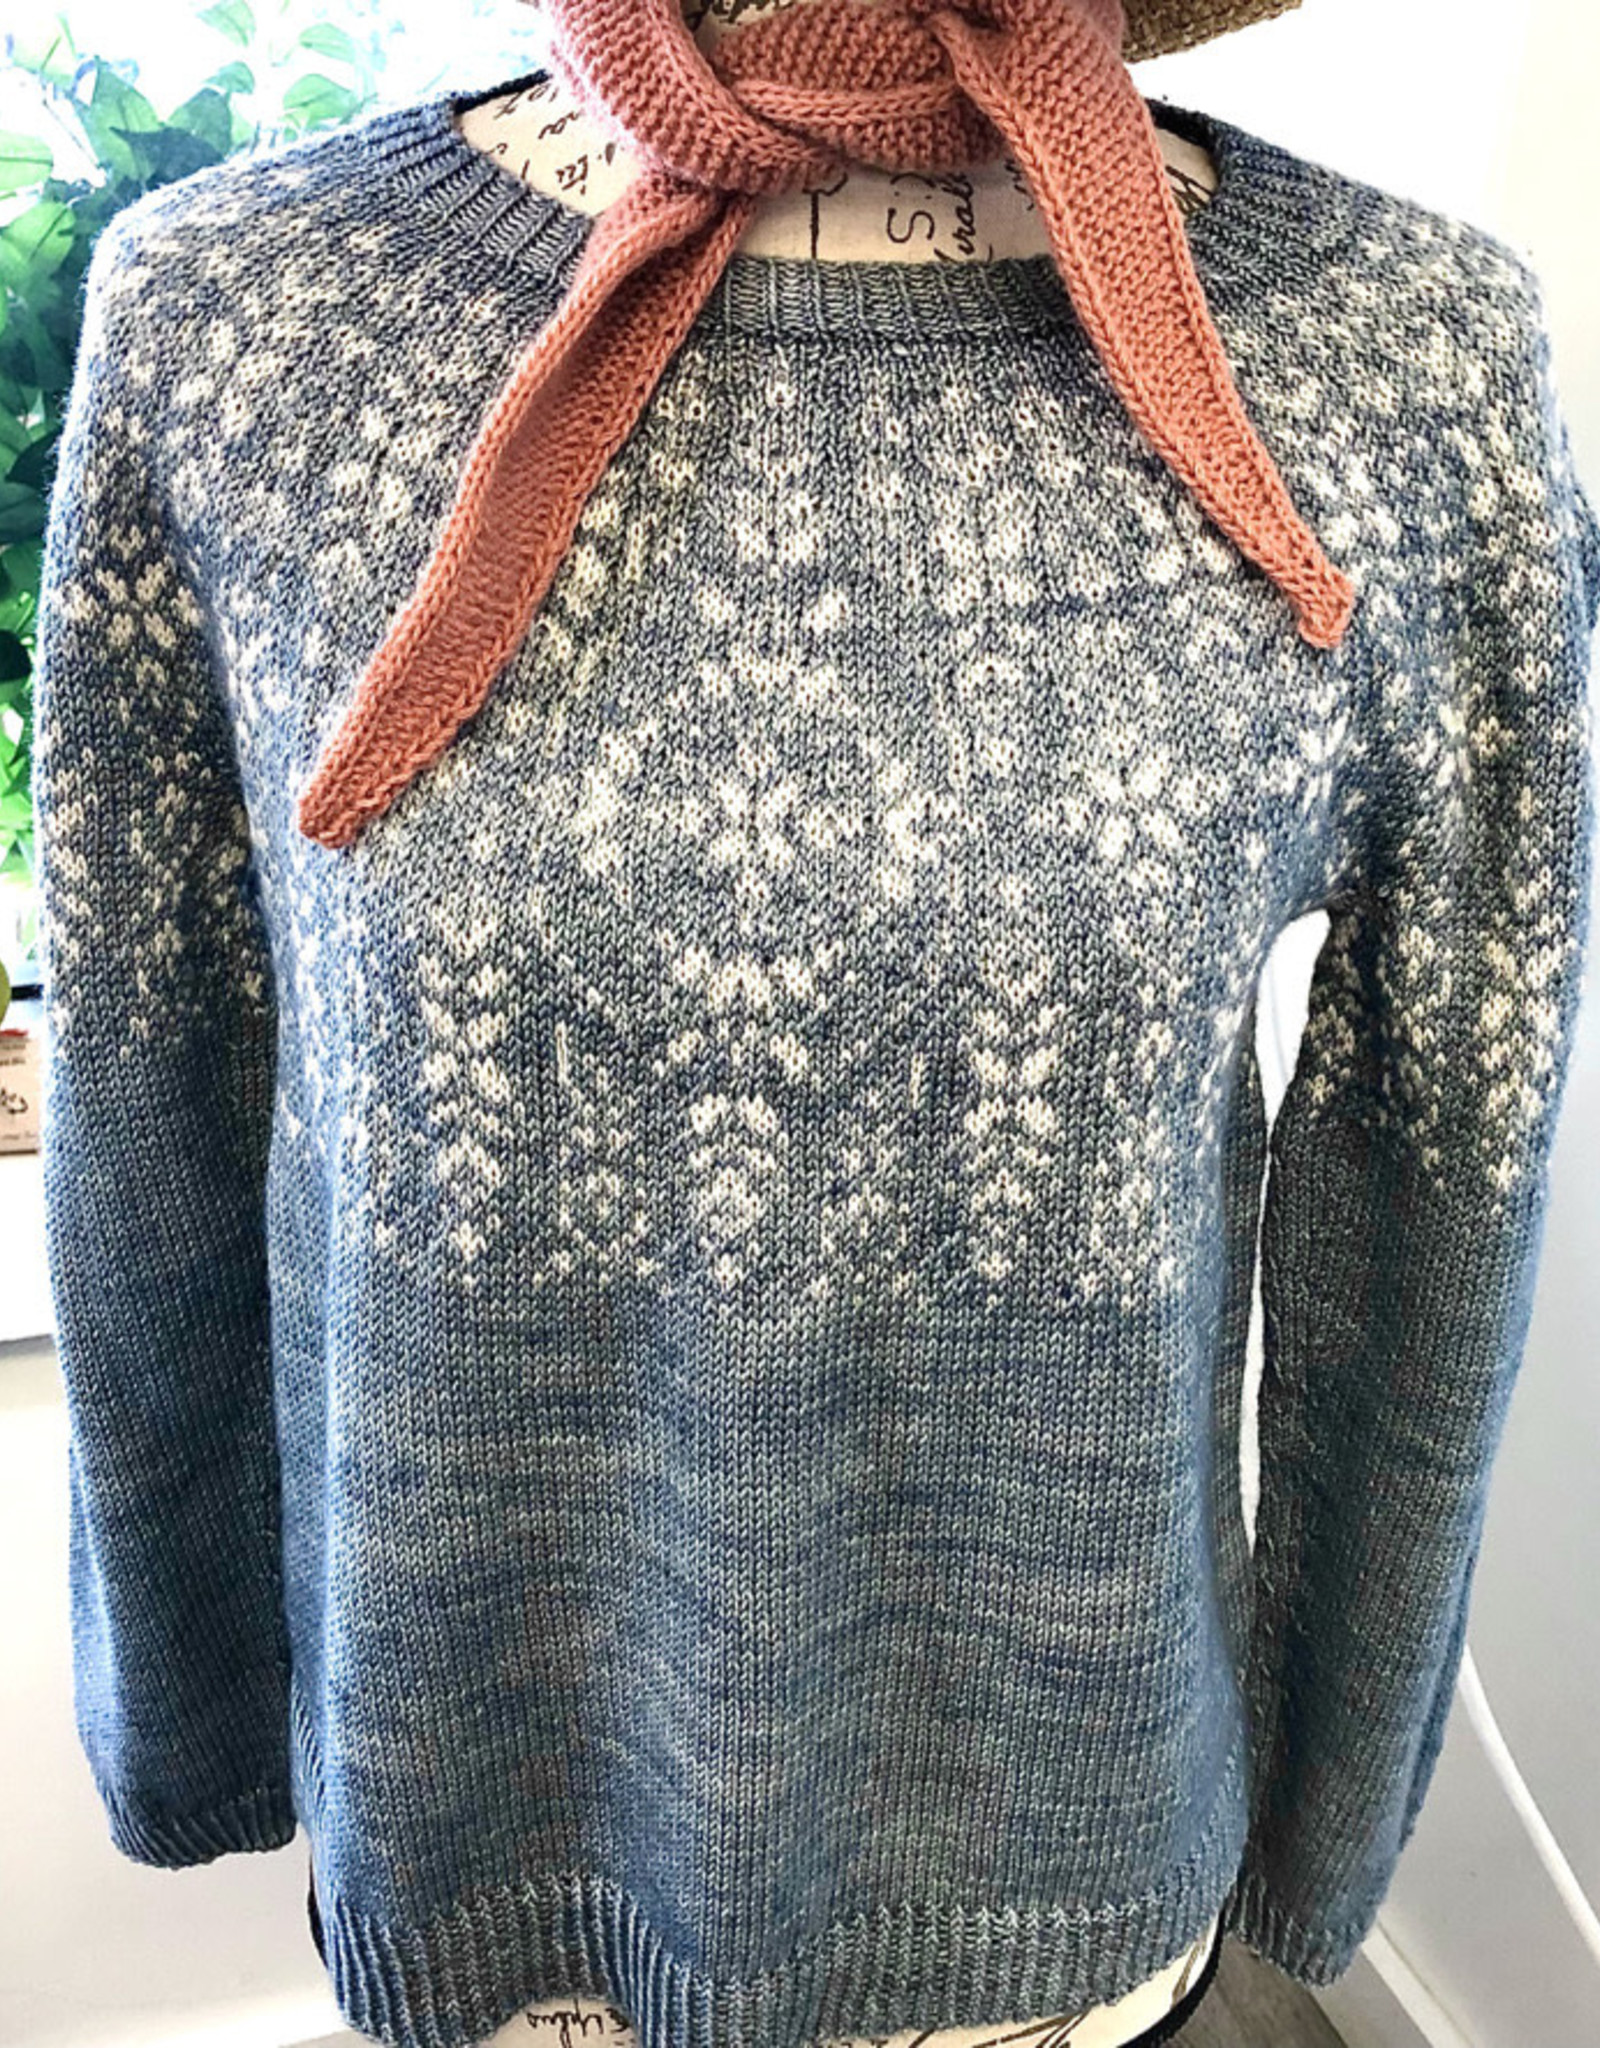 Susie Q Exhale Sweater